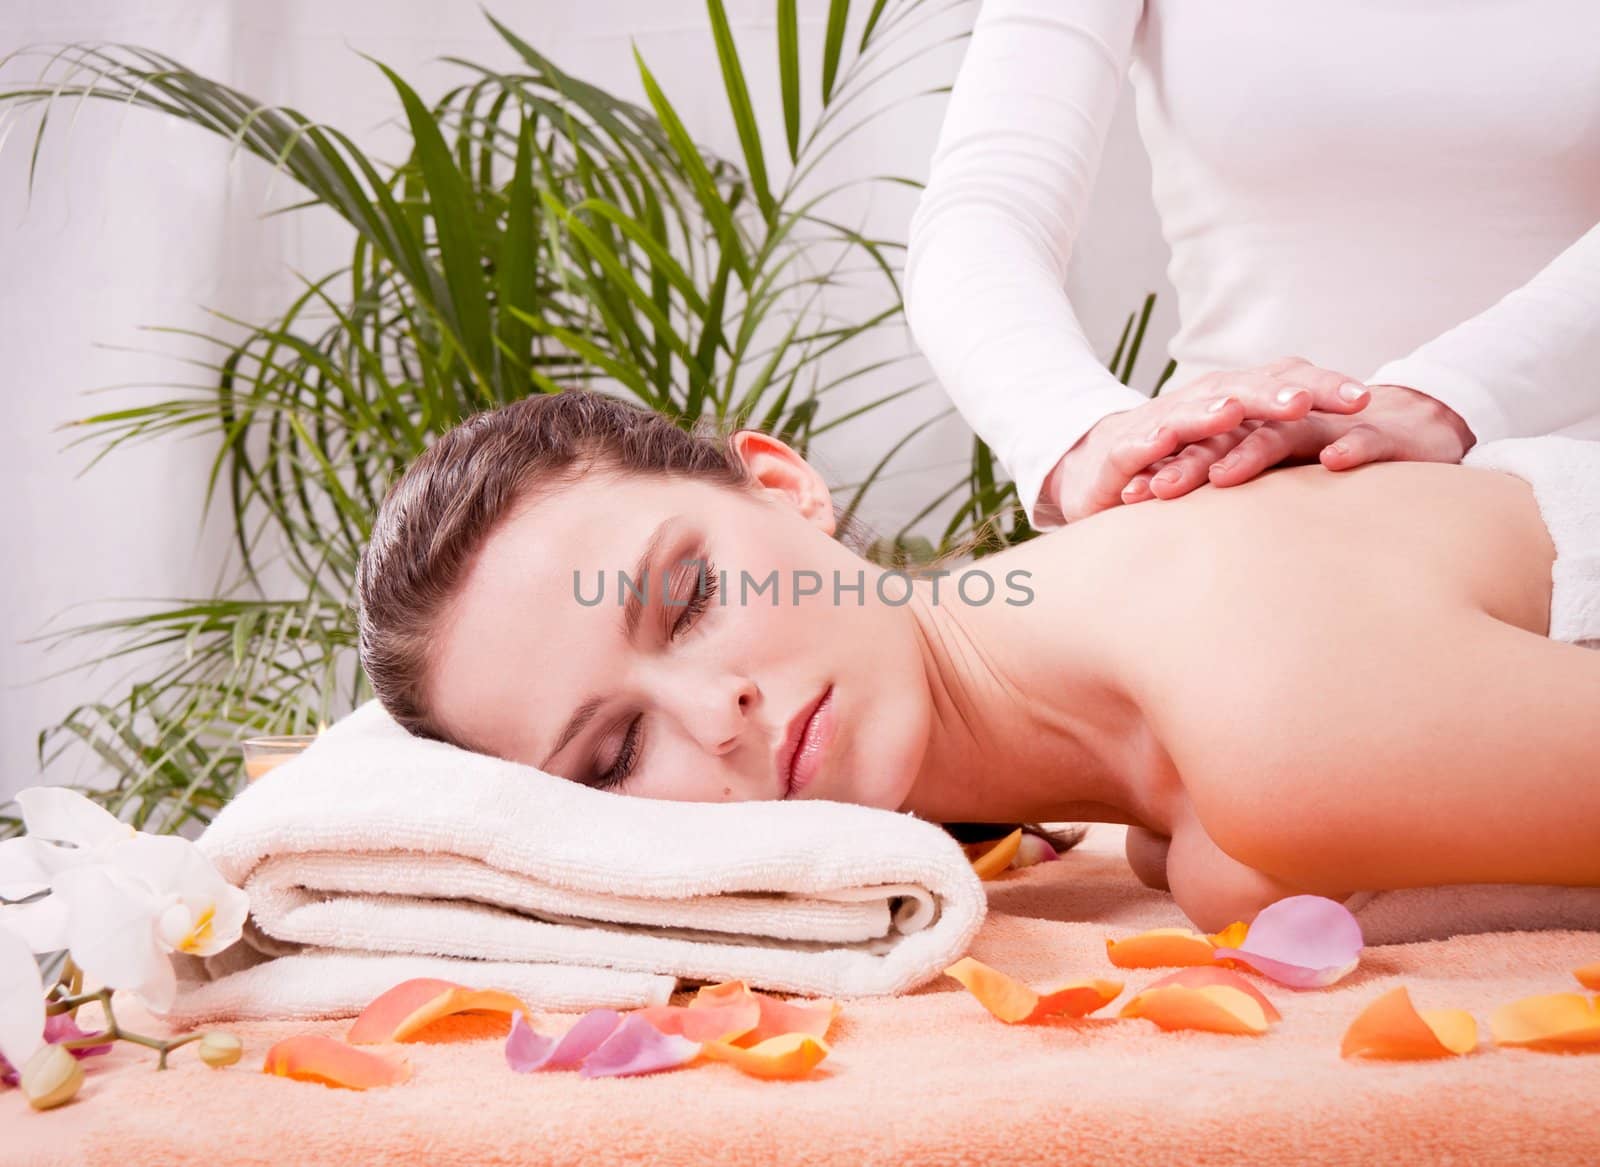 young attractive smilig woman doing wellness spa relaxing massage